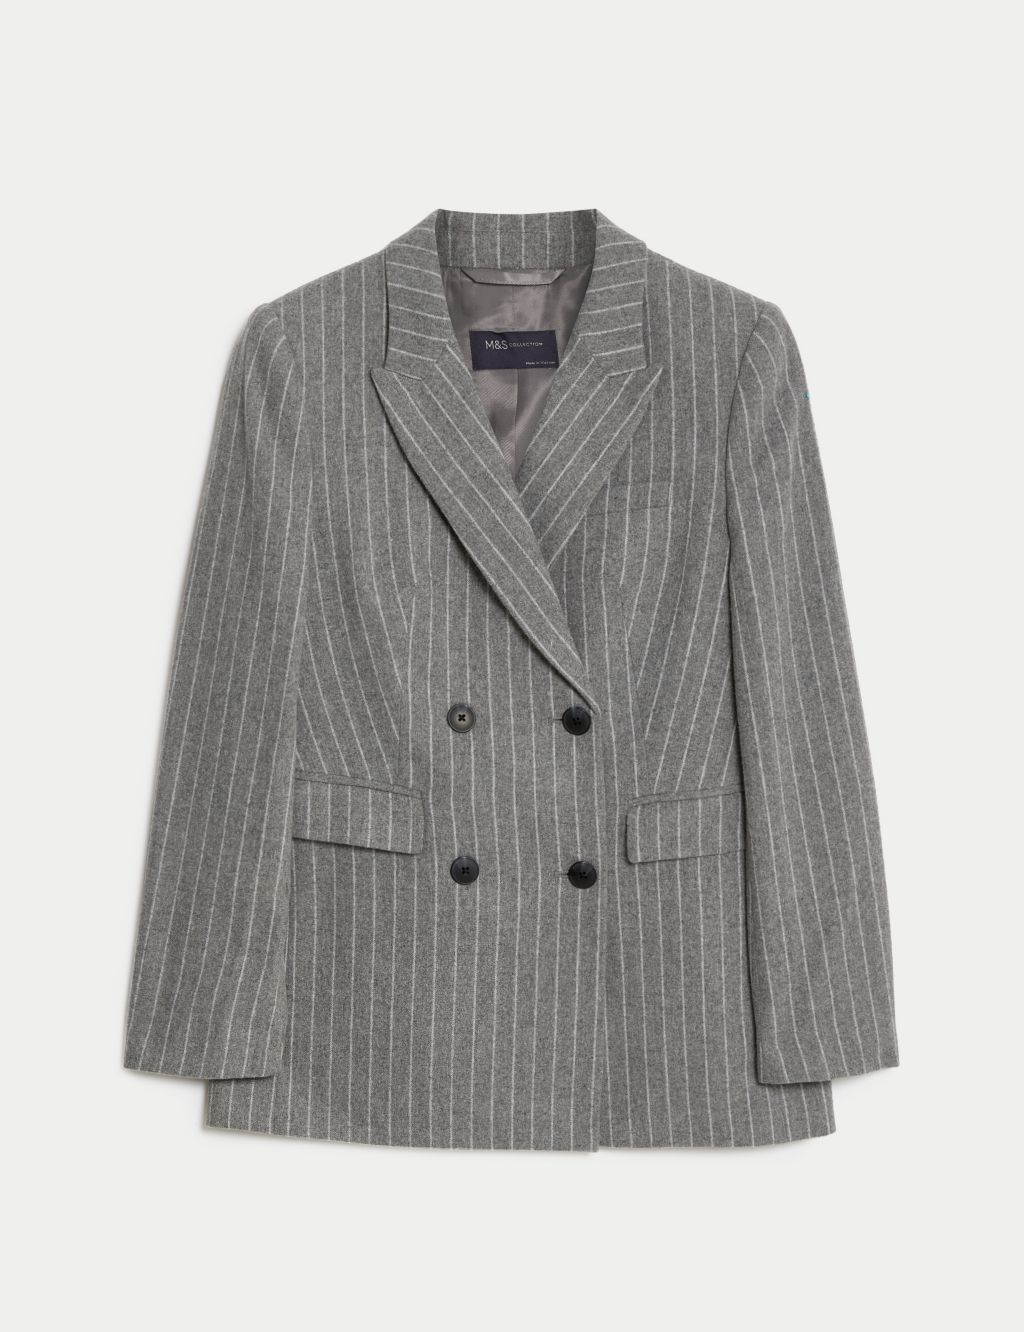 Relaxed Pinstripe Blazer with Wool image 2